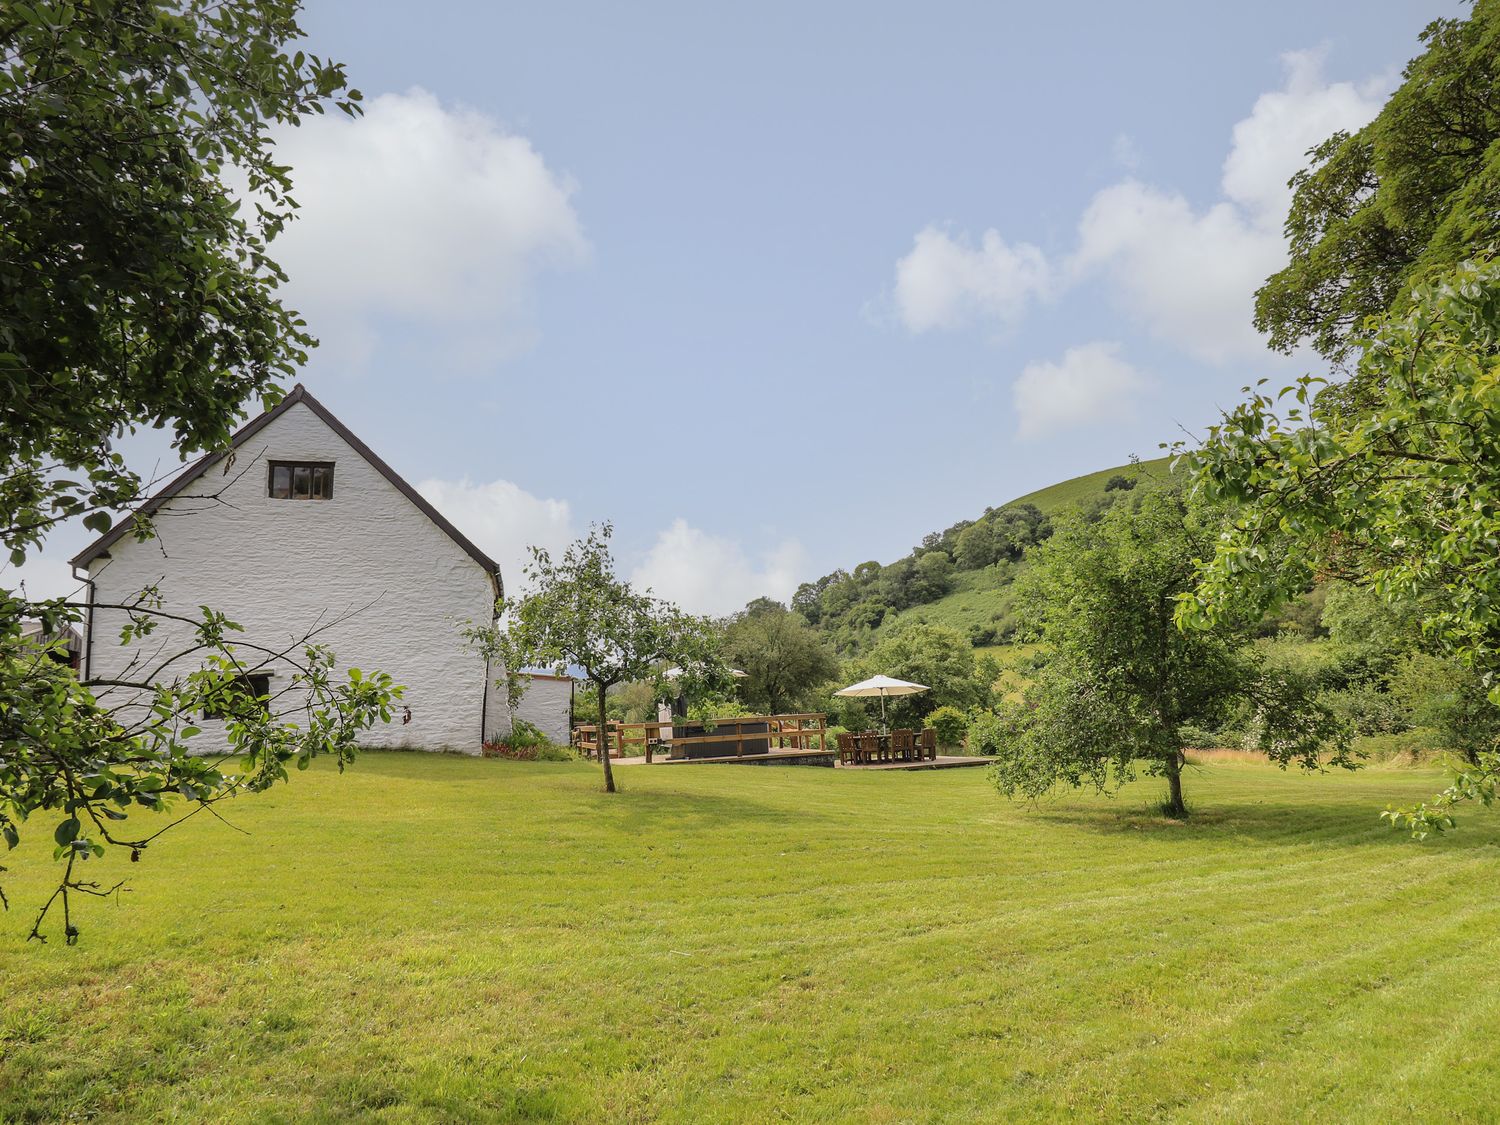 Penarth, Cregrina, near Builth Wells, Powys, in Wales. Hot tub. Smart TV. Woodburning stove. Parking